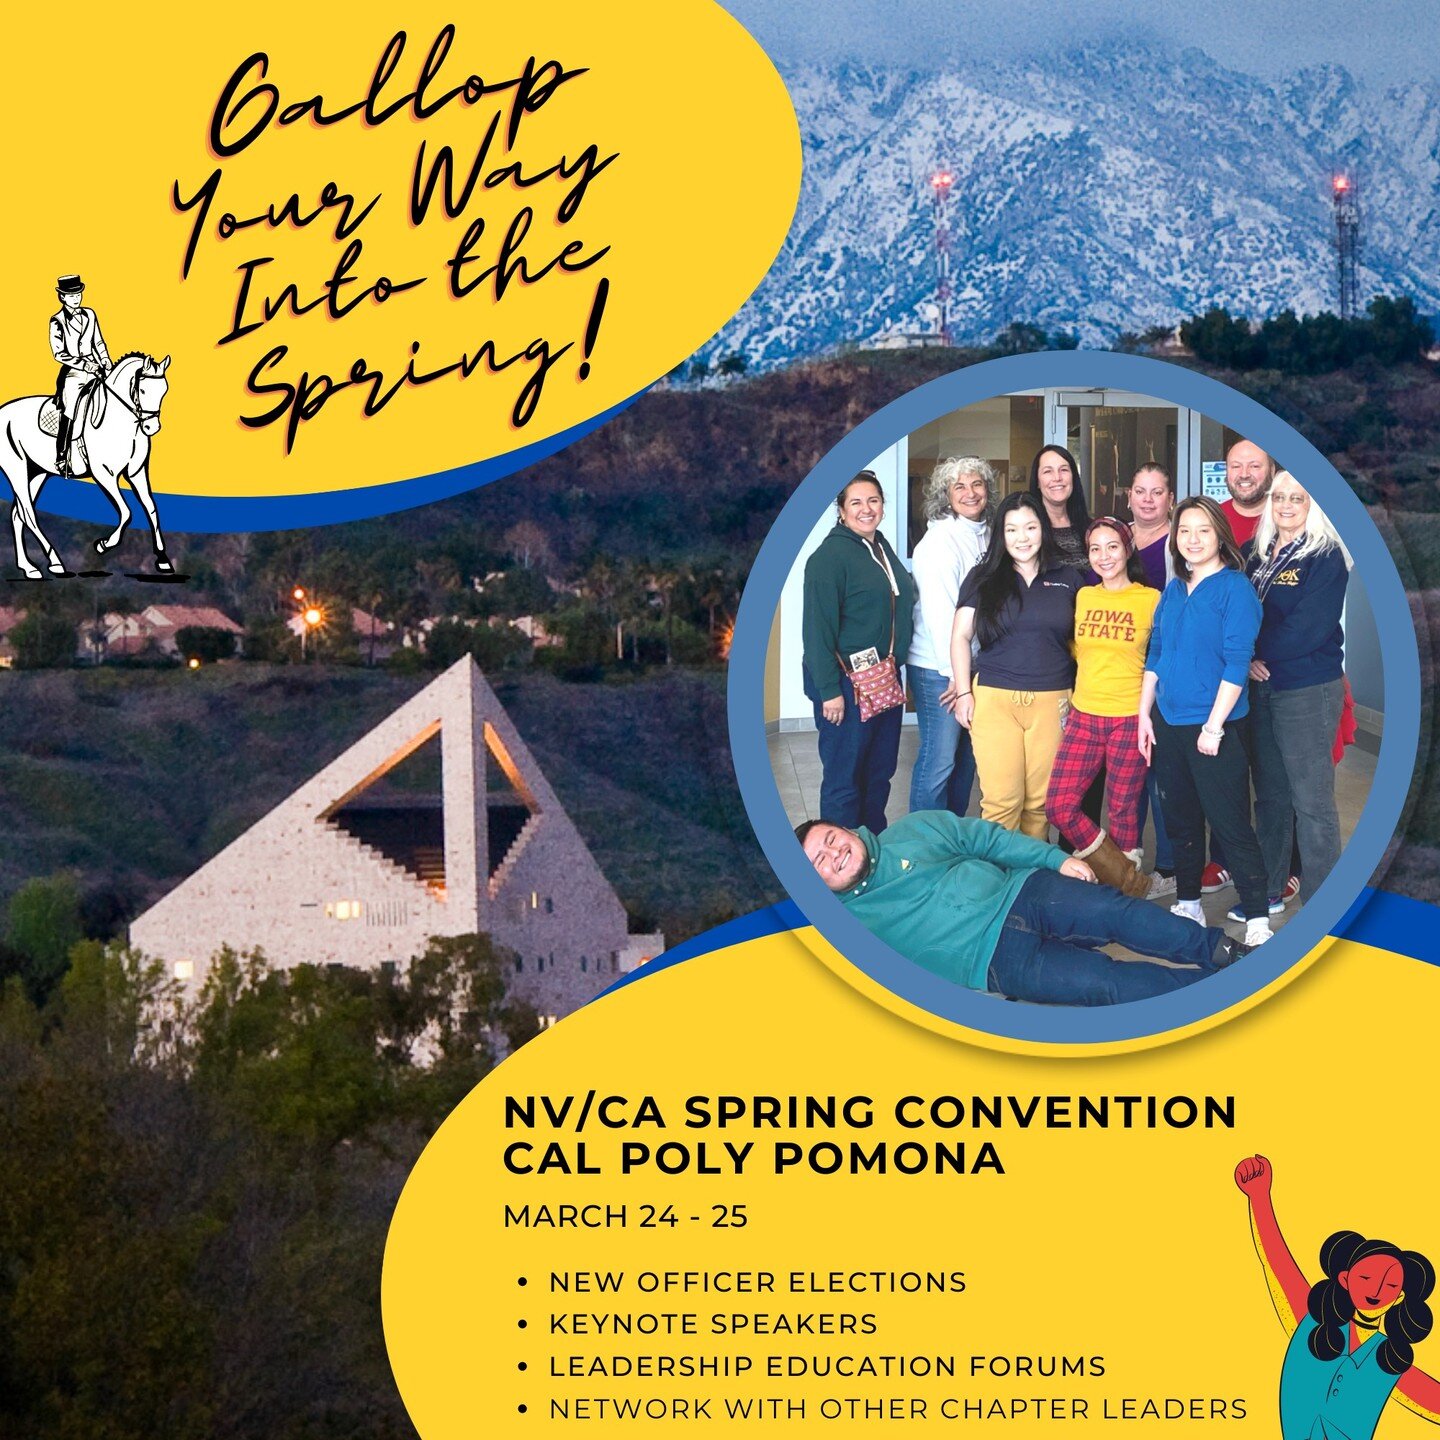 Spring Convention is 17 days away! Remember, it takes place on March 24-25, 2023 at the Kellogg West Conference Center and Lodge located on the Cal Poly Pomona Campus in Pomona, CA. You will find the agenda, registration link as well as the lodging d